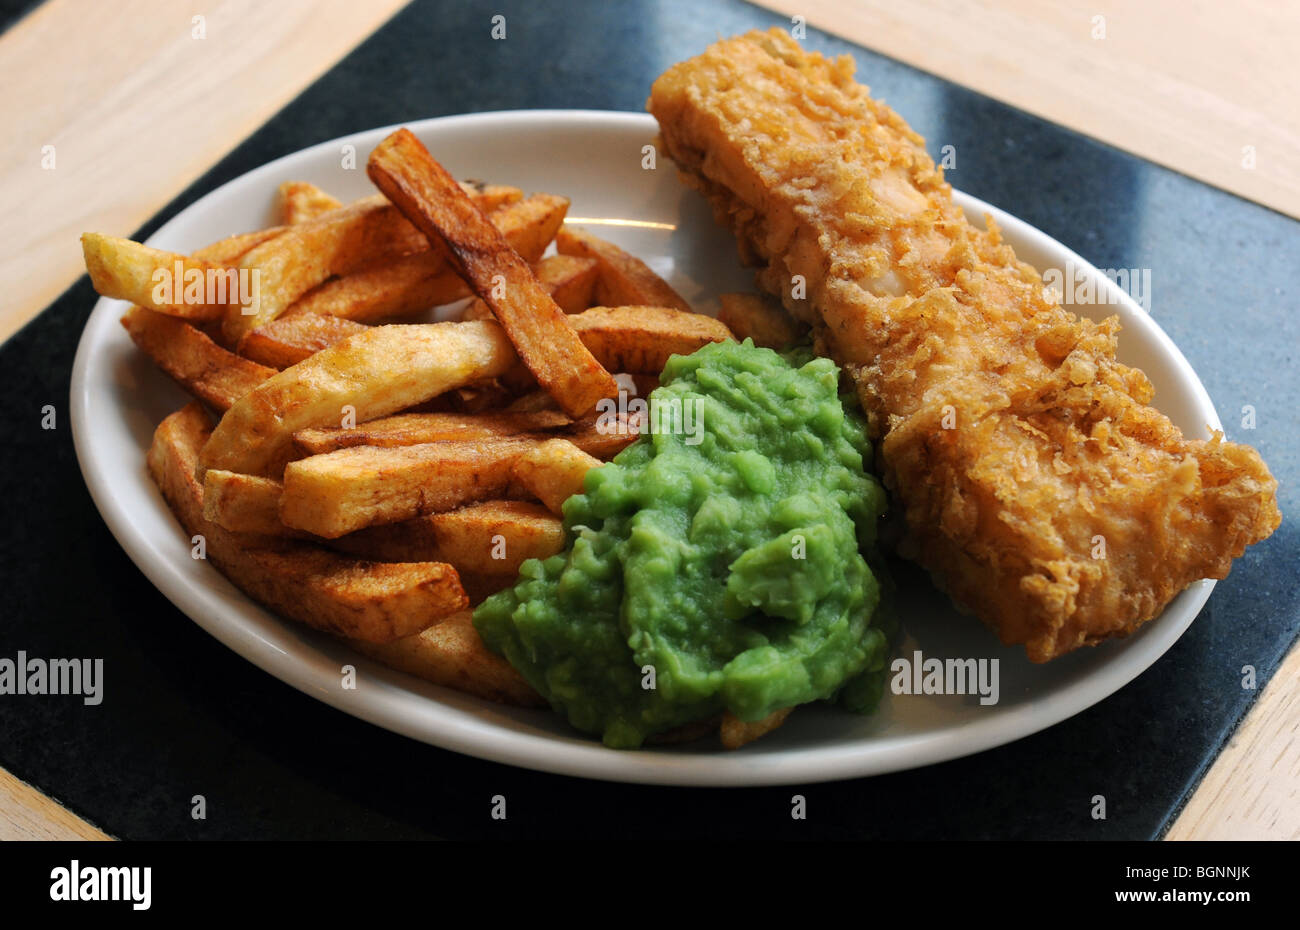 A plate of fish chips and mushy peas Stock Photo